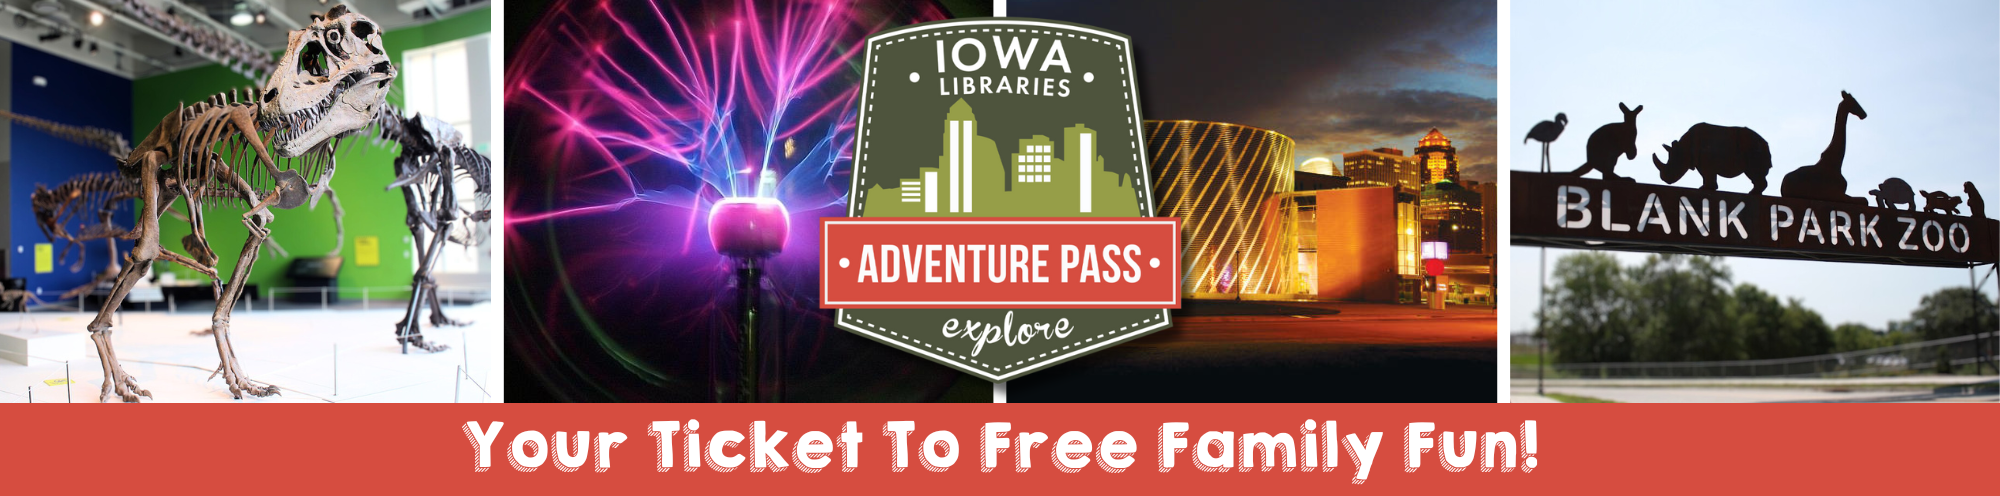 Adventure pass: Your Ticket to Free Family Fun!